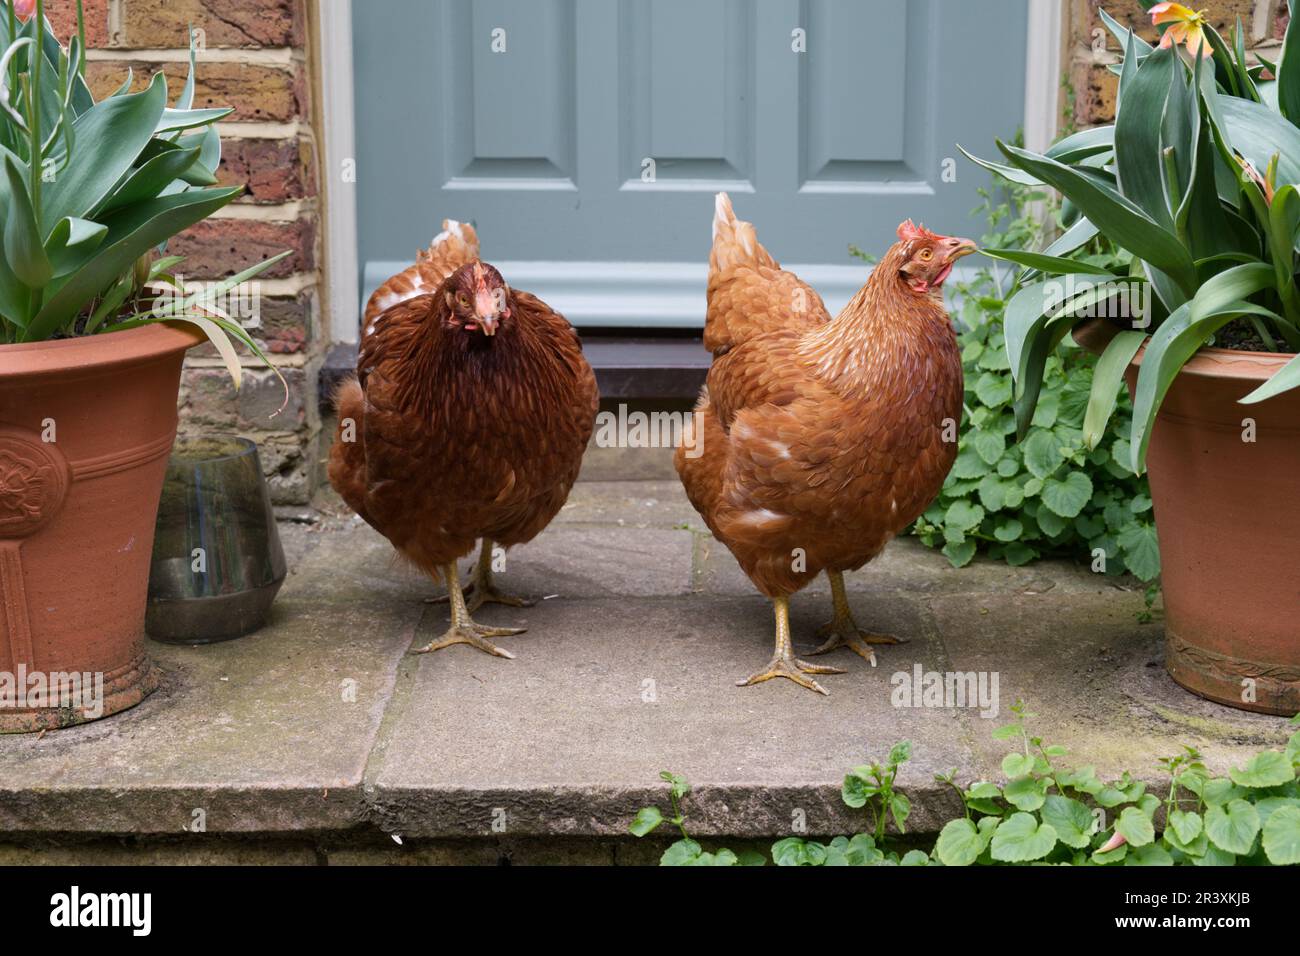 two pet chicken trying to get into a door Stock Photo